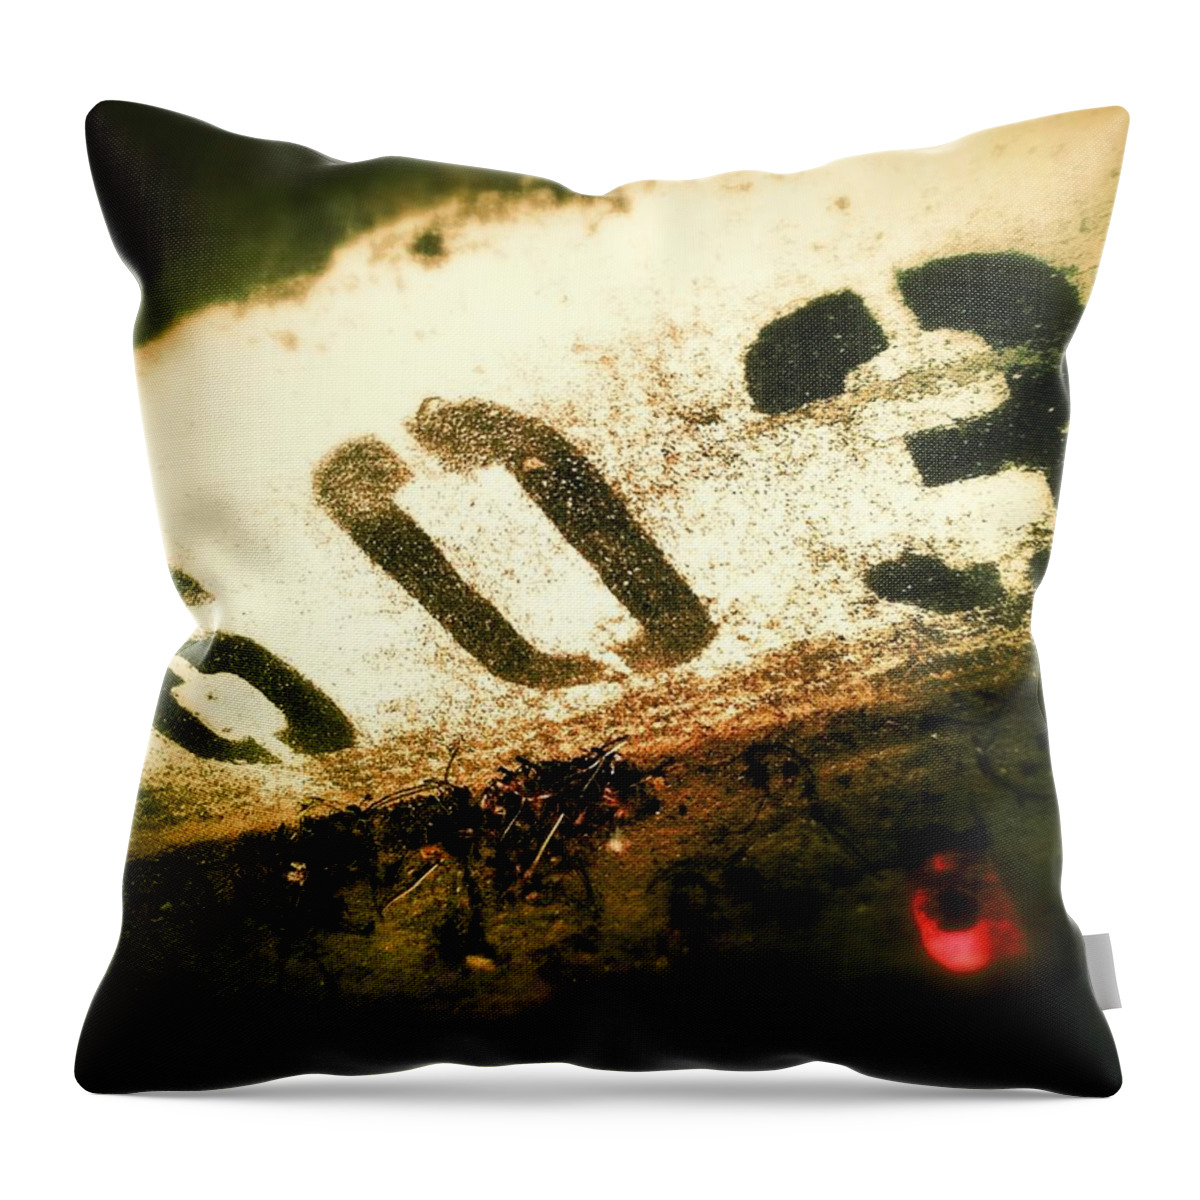 Street Number City Throw Pillow featuring the photograph 11603 by Olivier Calas